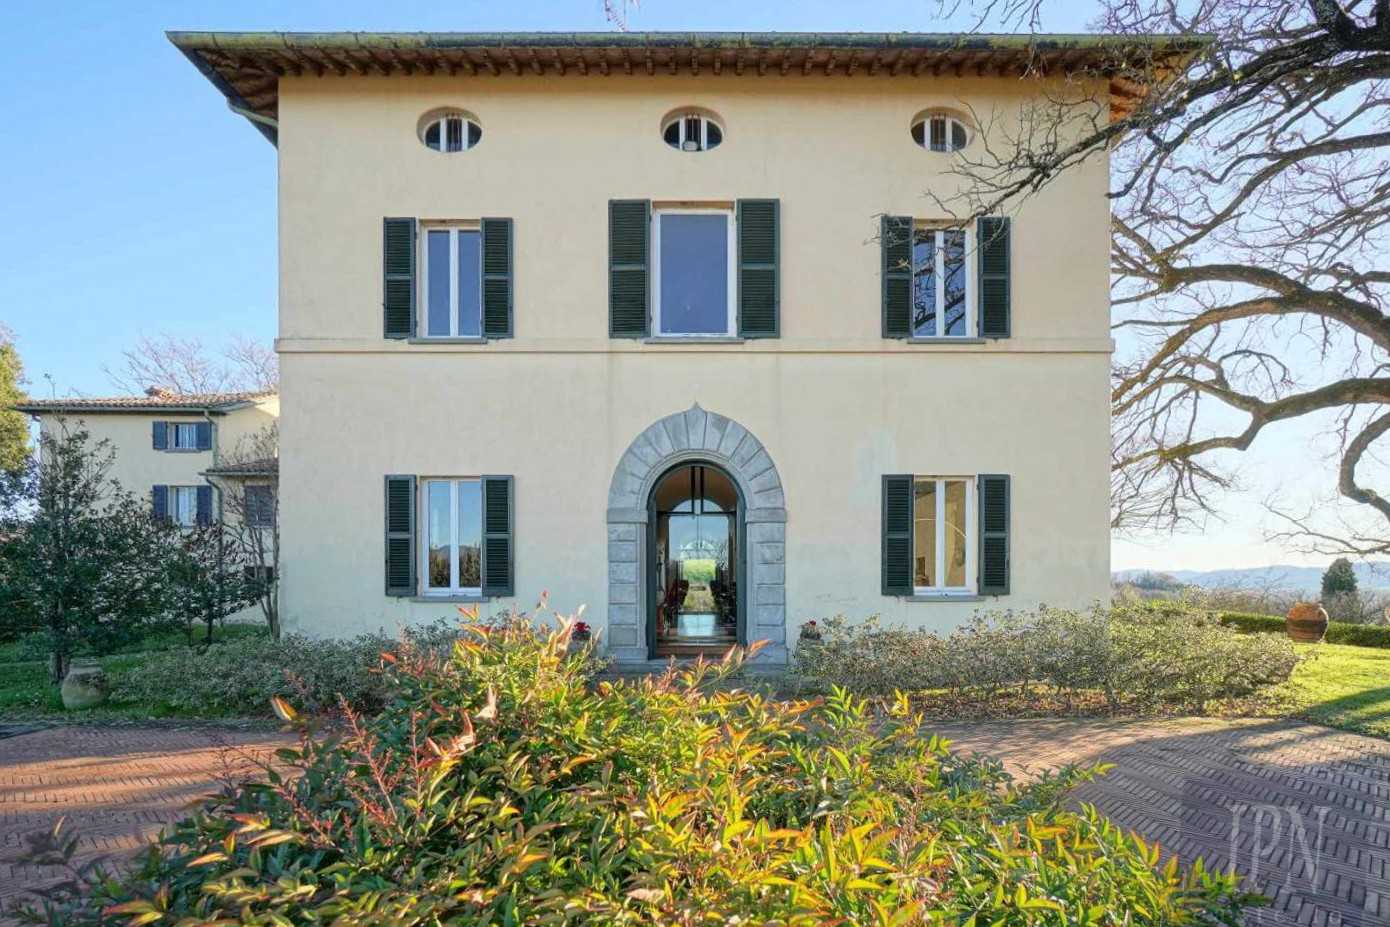 Photos Villa steeped in history in Umbria above the Tiber valley